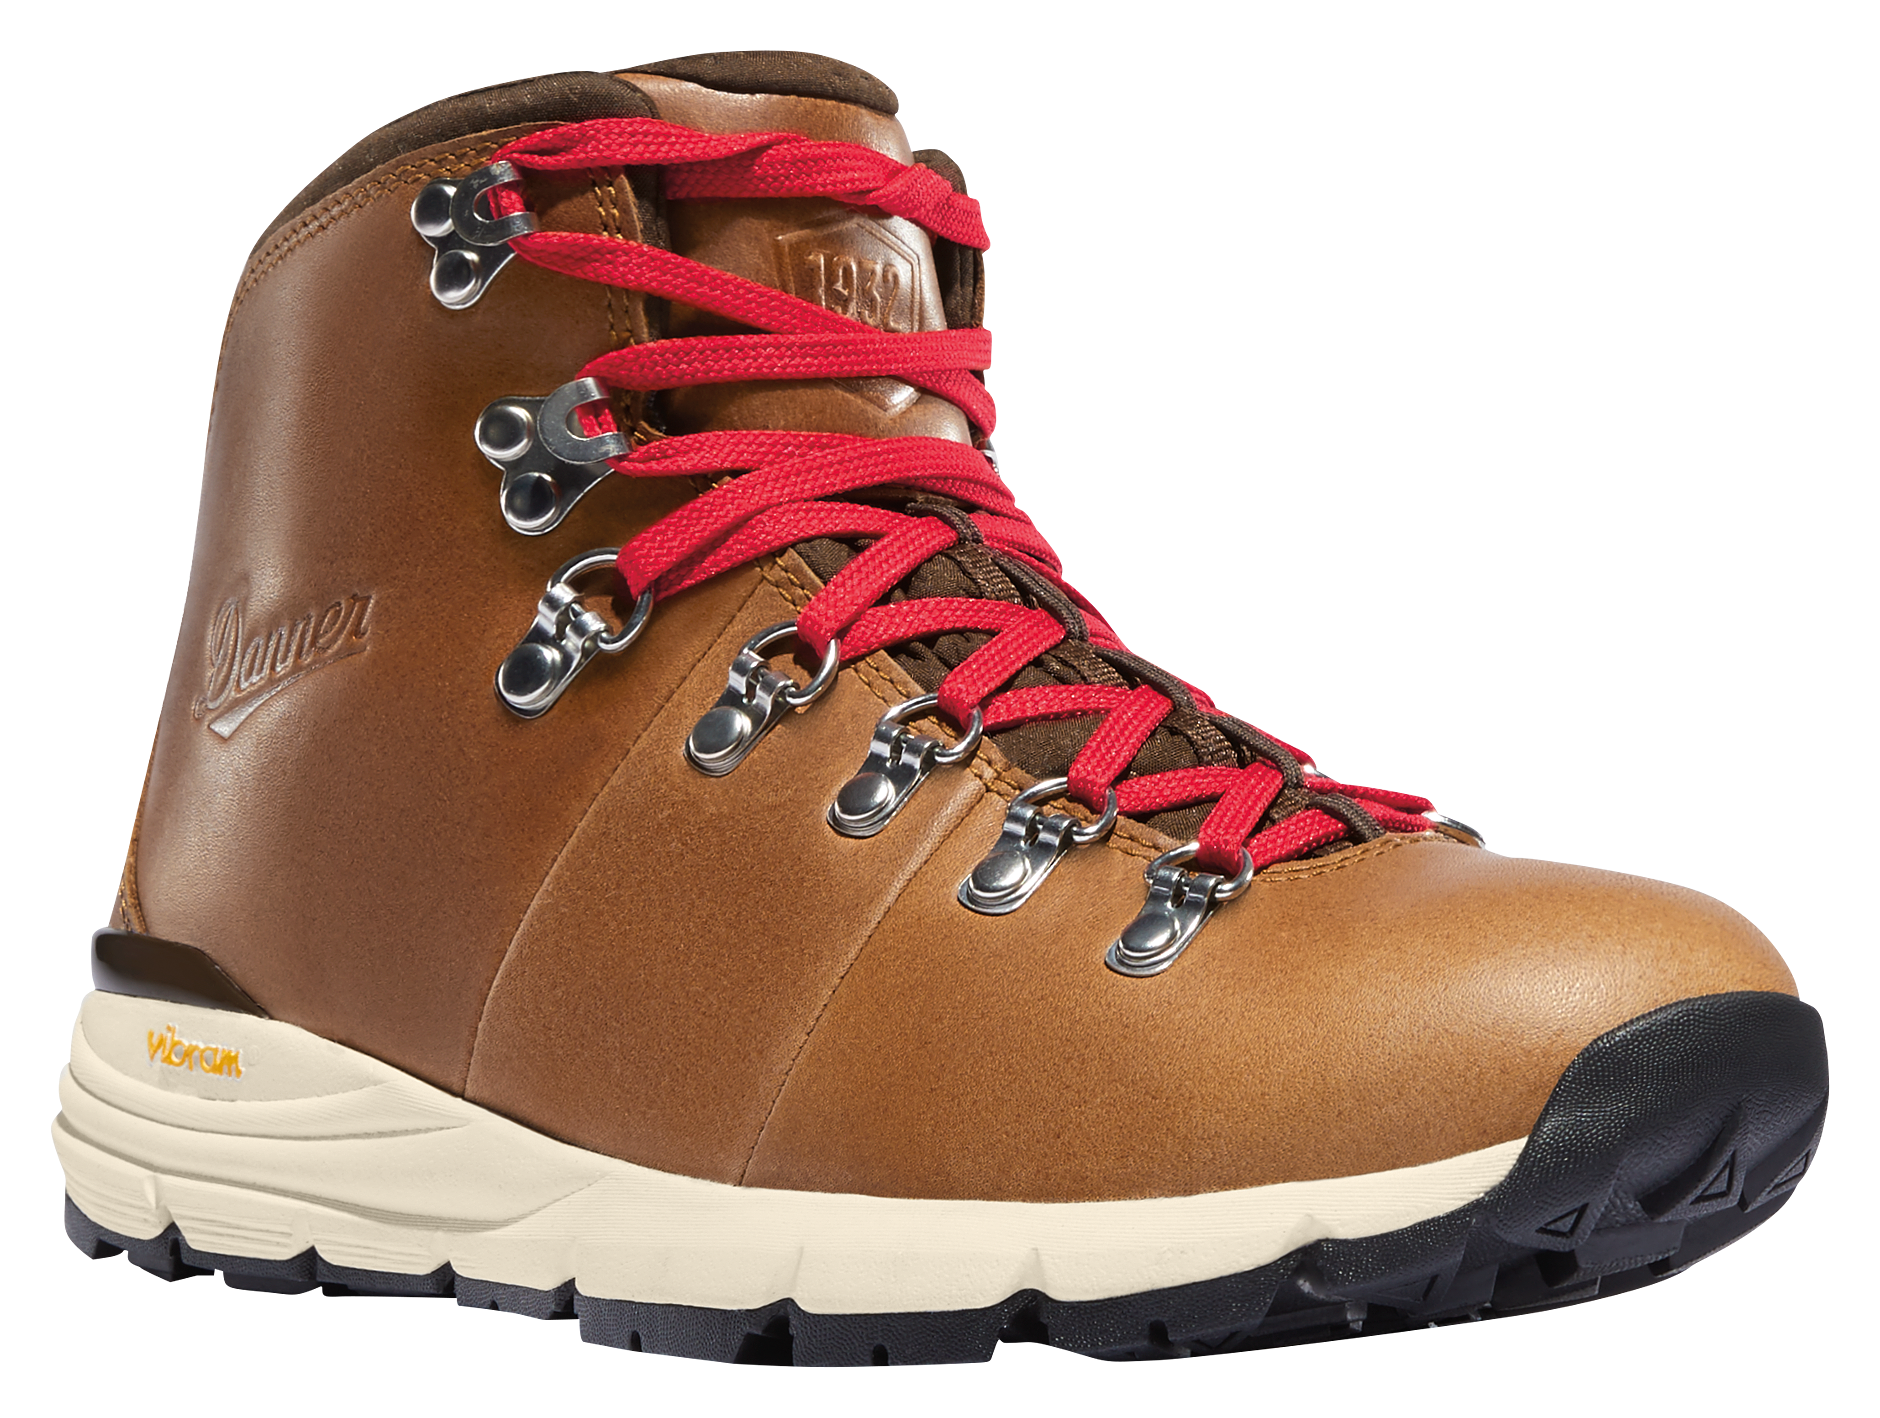 Danner Mountain 600 Leather Waterproof Hiking Boots for Ladies | Cabela's